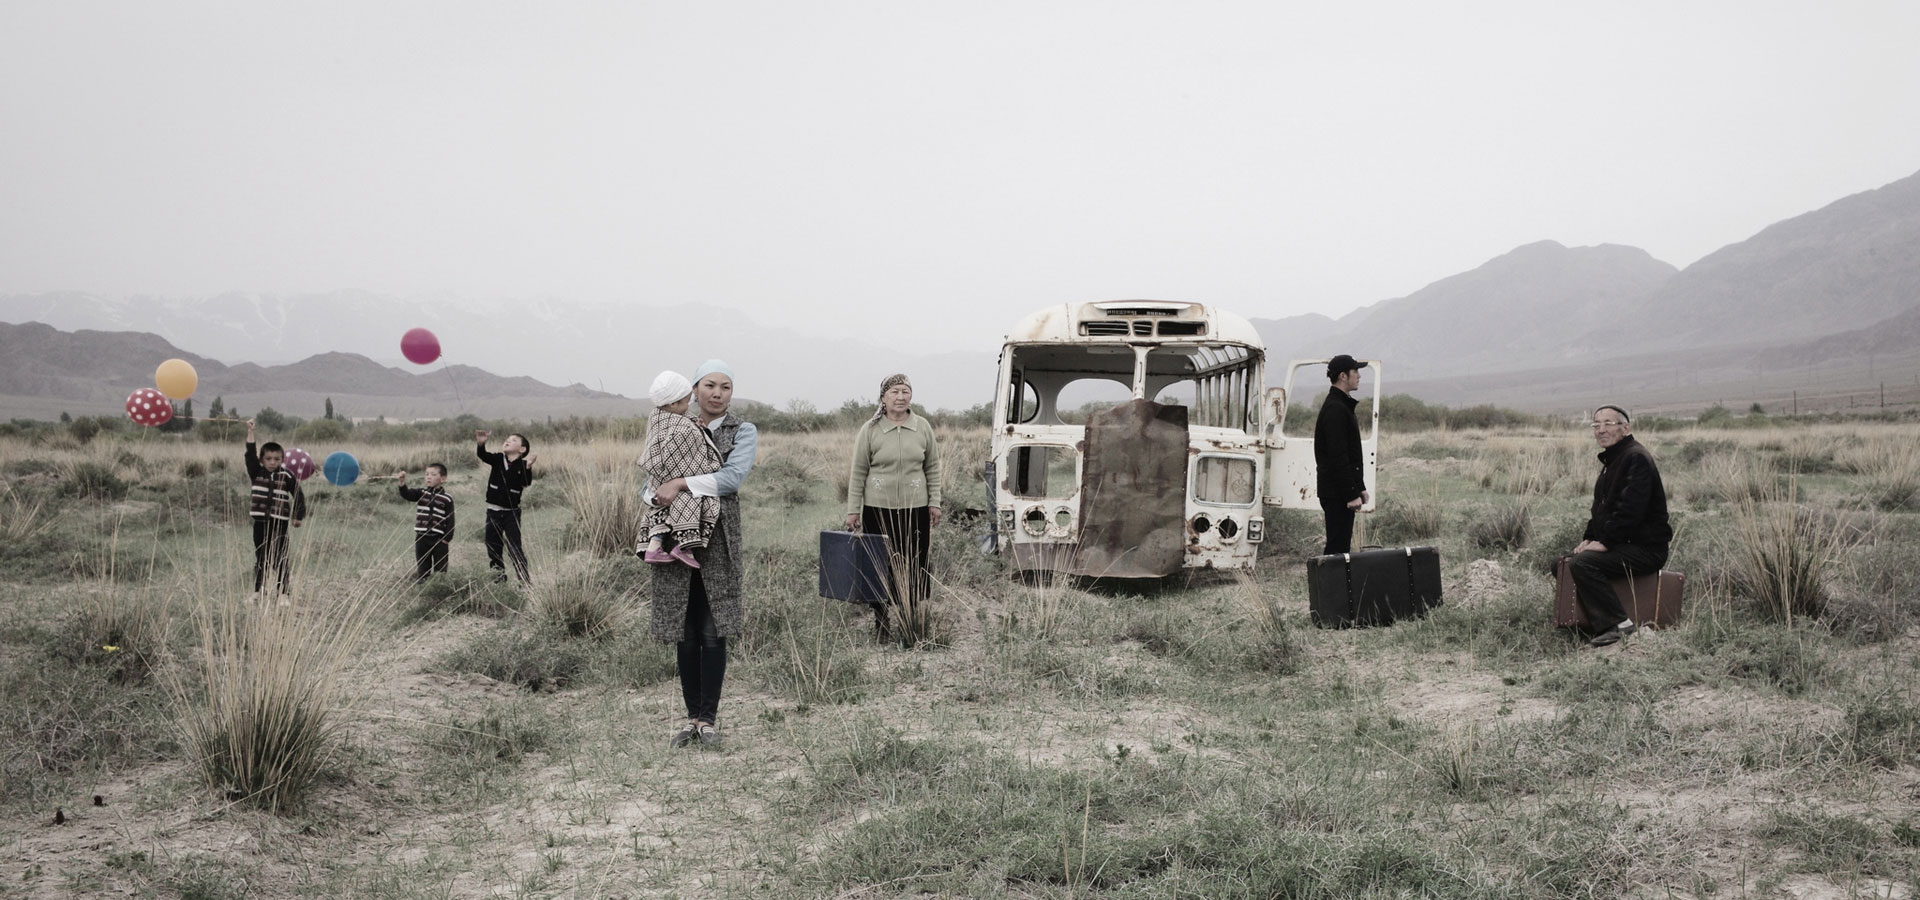 The lost Soviet dream is both charming and haunting in these photos of Kyrgyzstan 